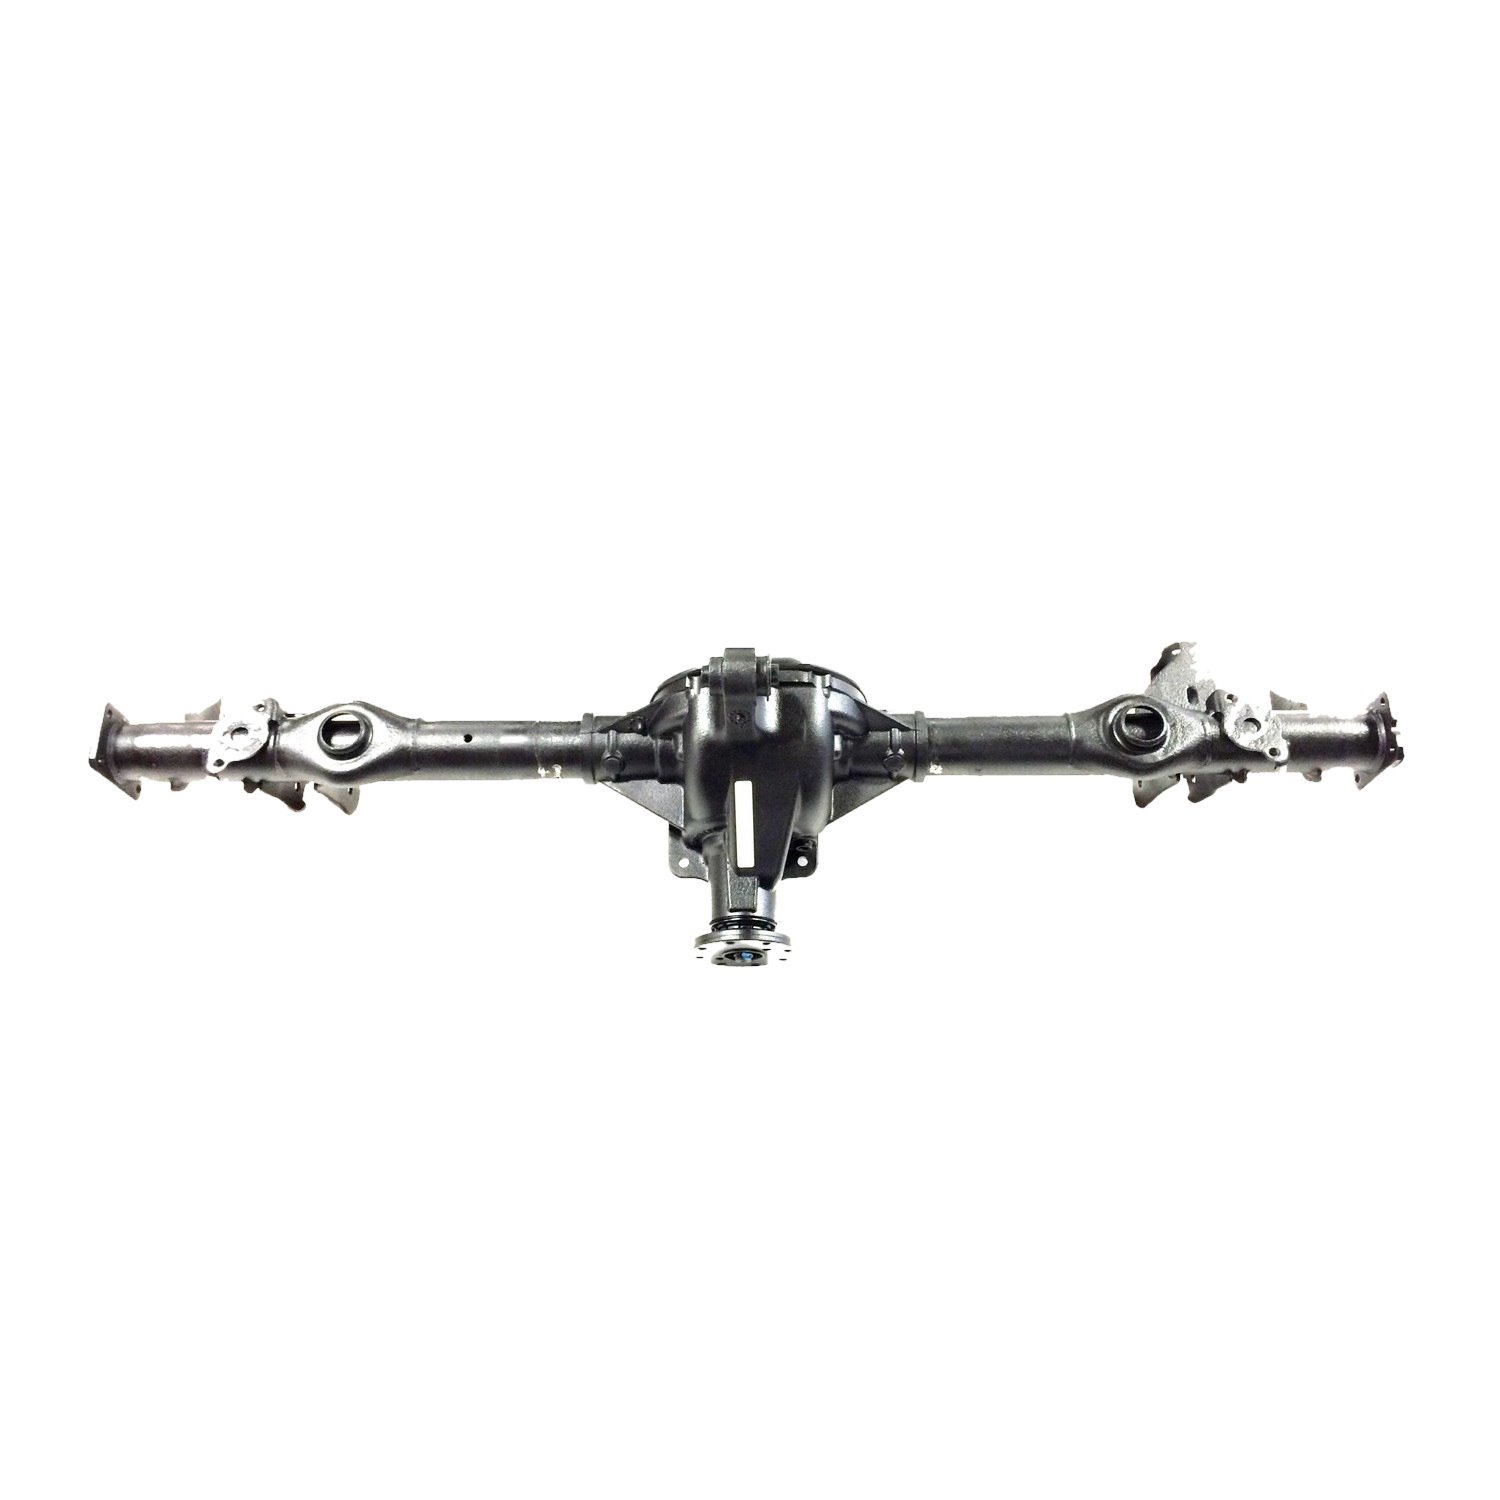 Remanufactured Complete Axle Assy for Dana 50 1999-00 F250 & F350 4.30, SRW, 4 Wheel ABS